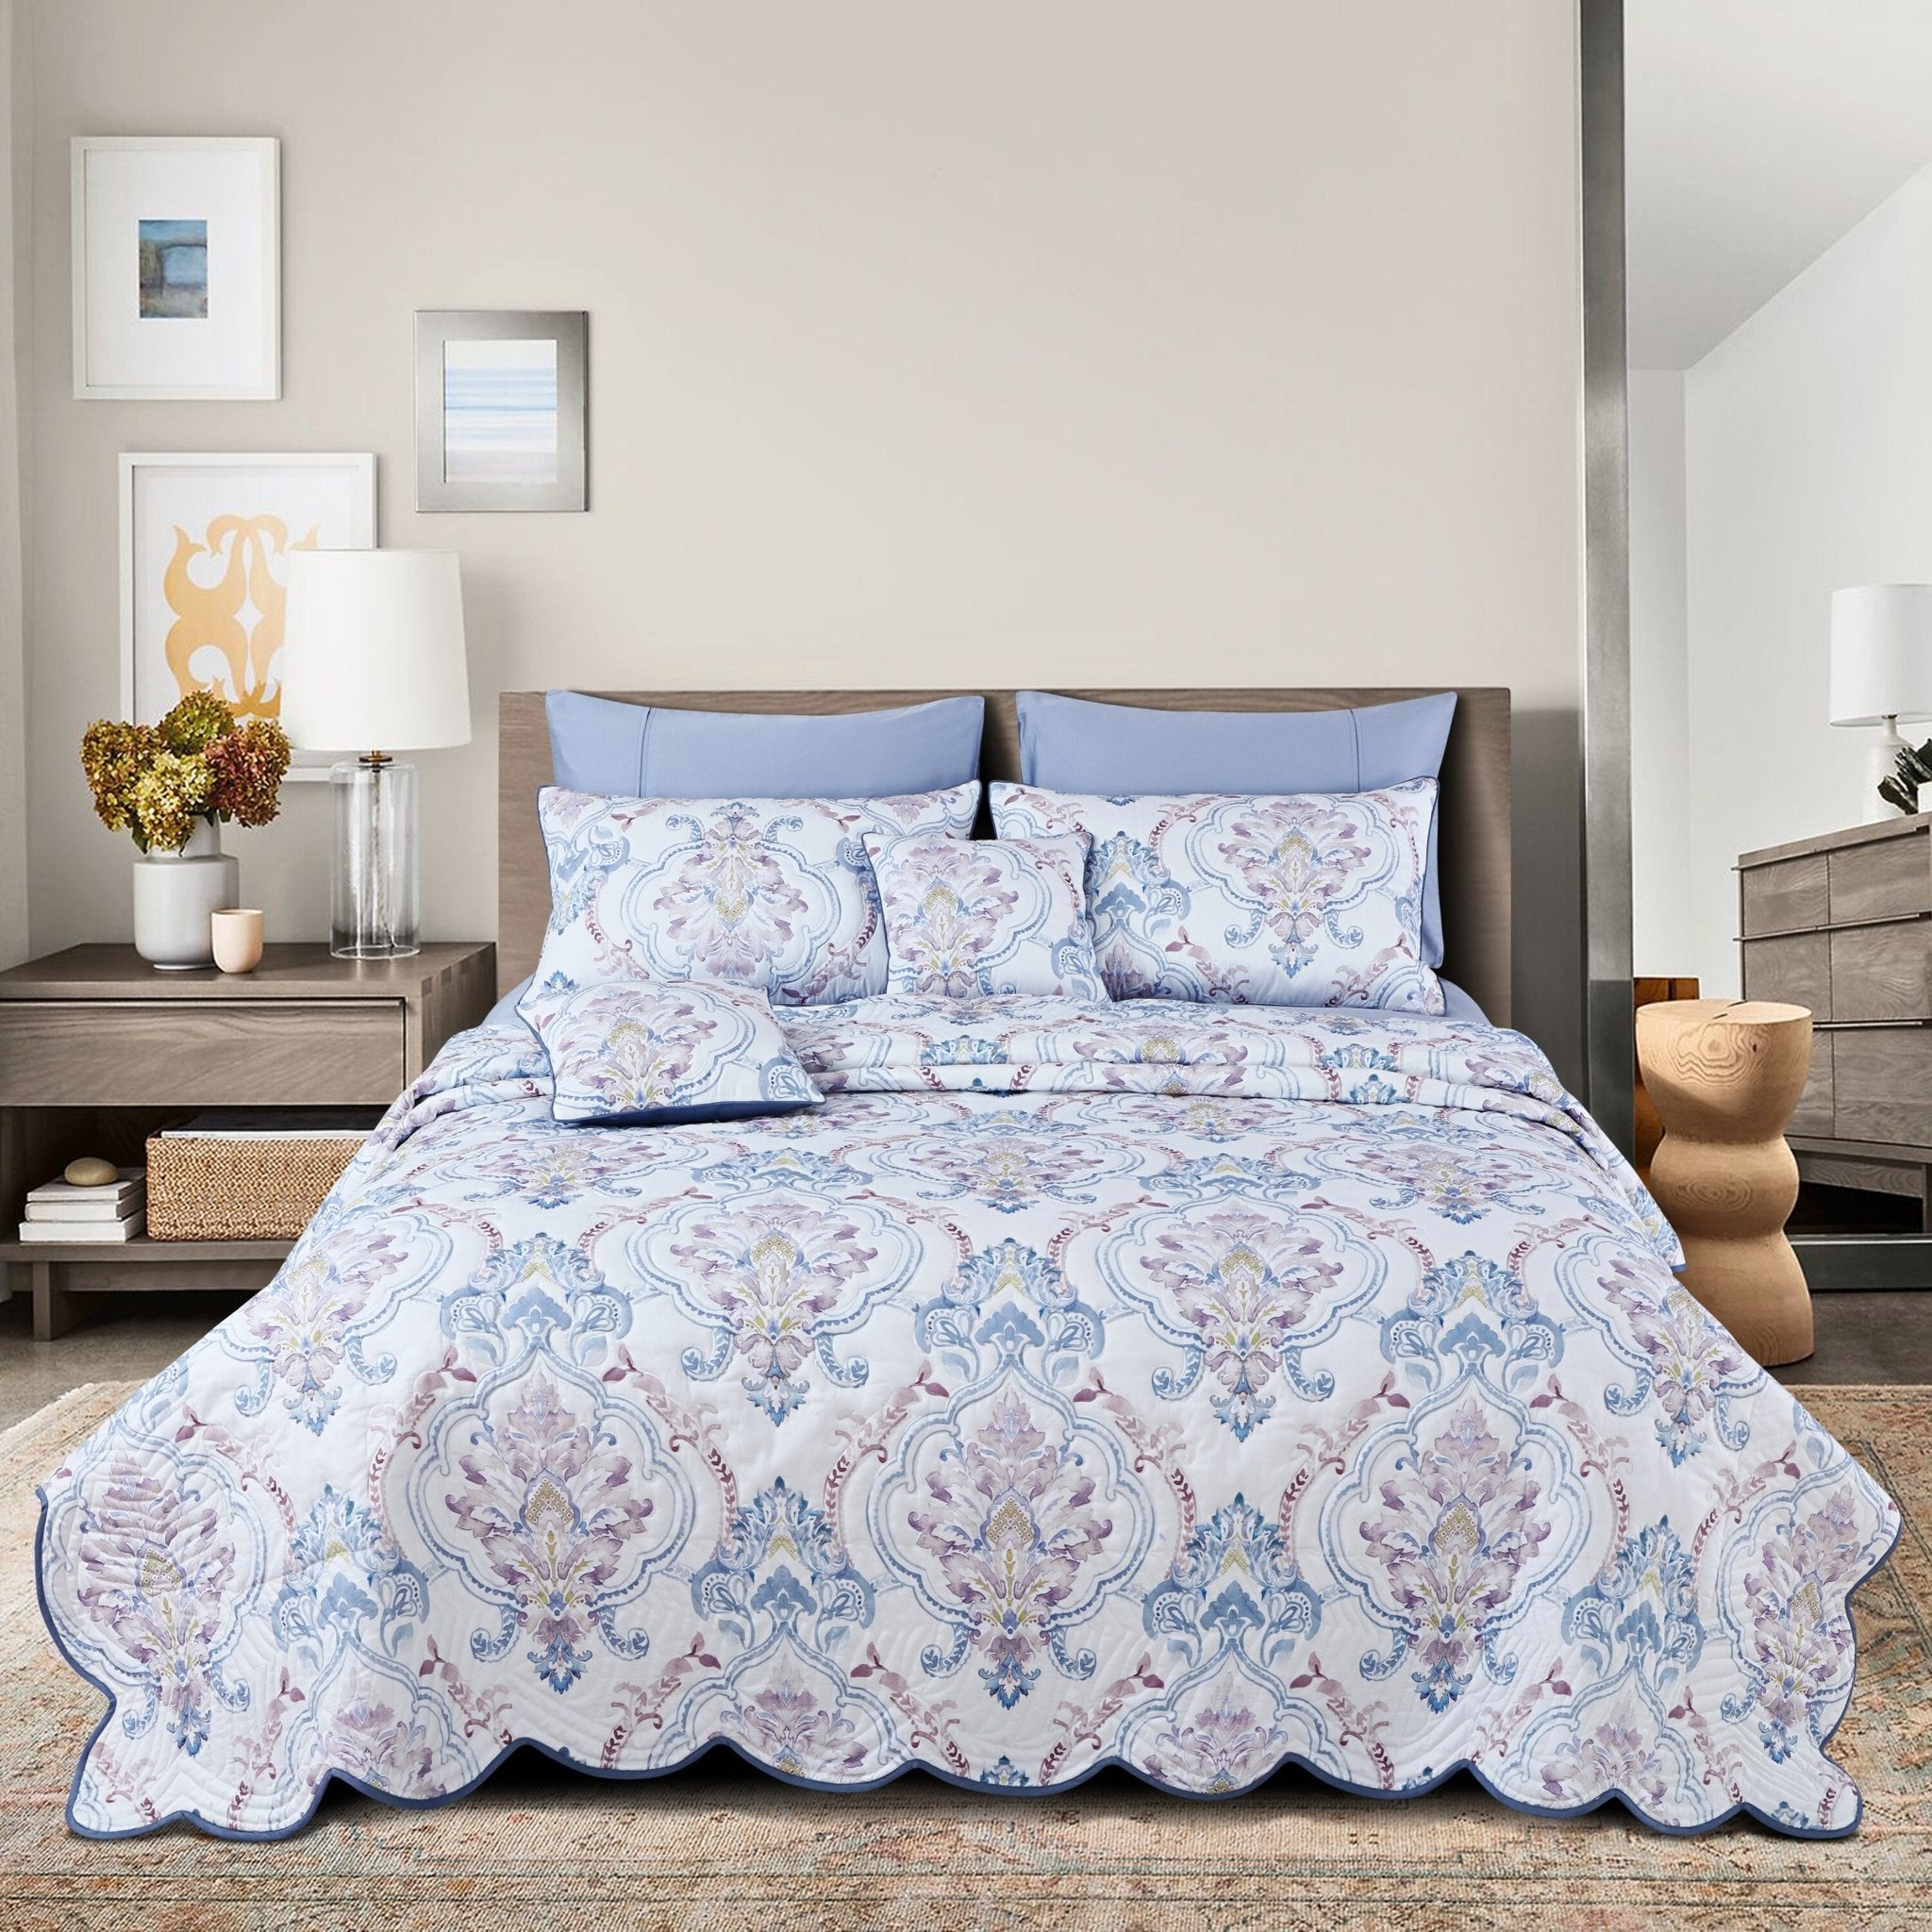 Malako Royale White & Blue Ethnic 100% Cotton King Size Quilted Bed Cover - MALAKO